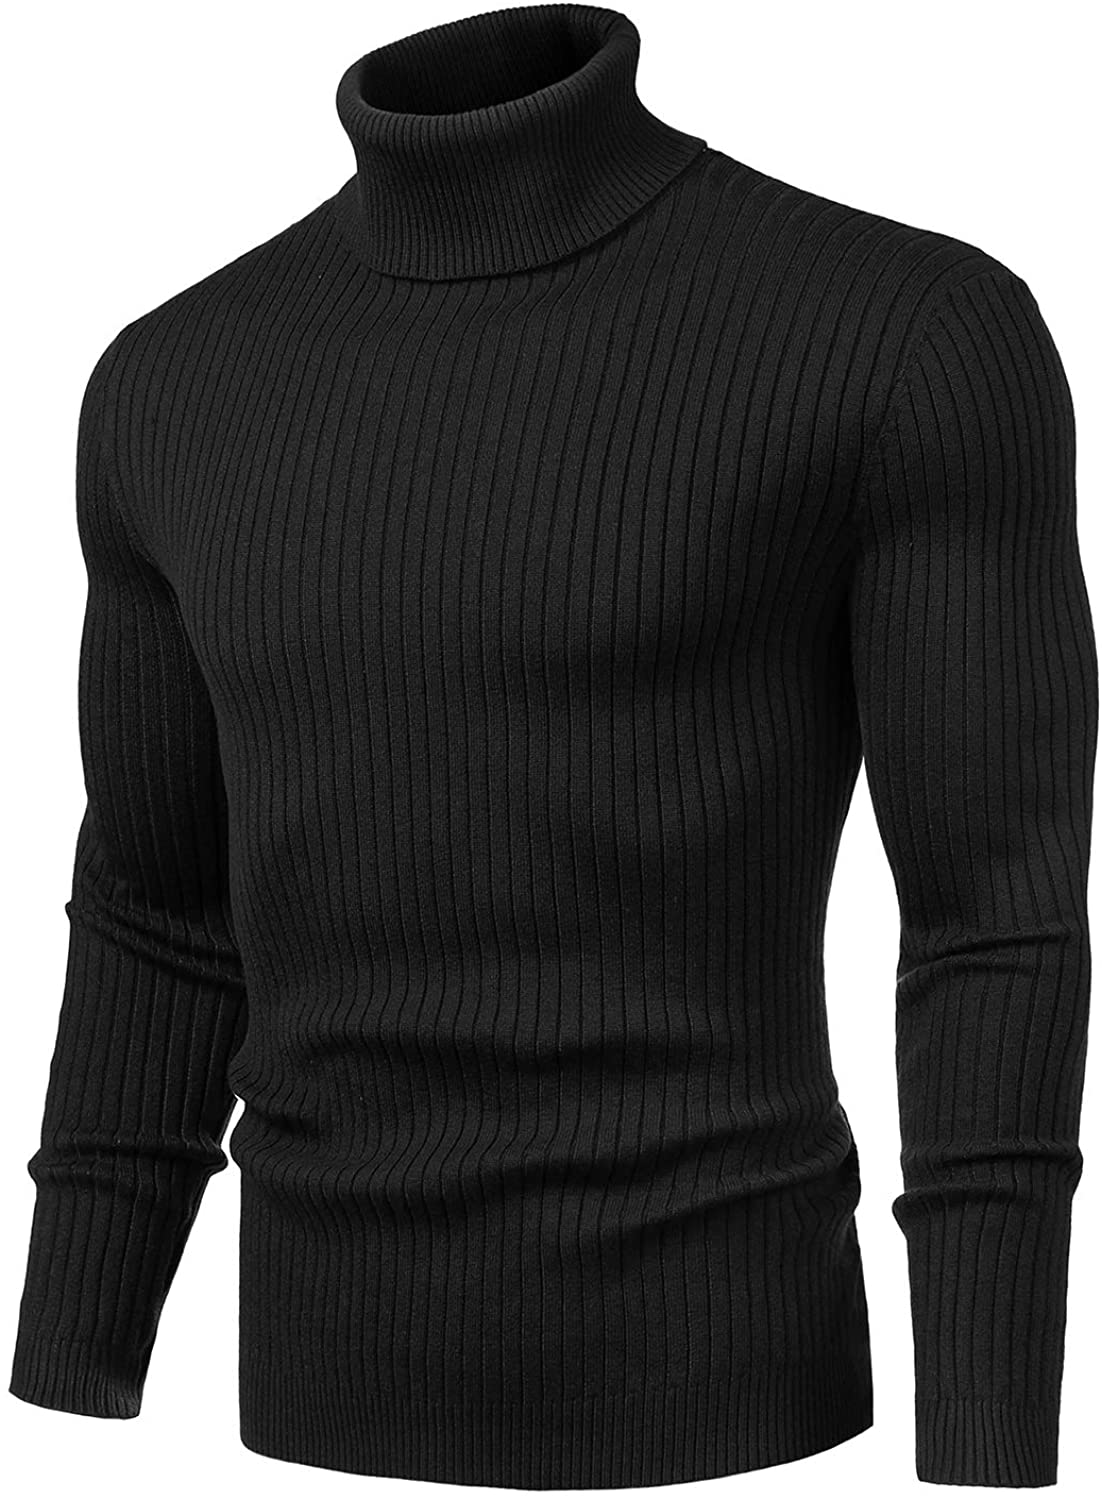 Jofemuho Mens Solid Color Turtle Neck Regular Fit Knitted Autumn Winter Pullover Sweater Jumper 